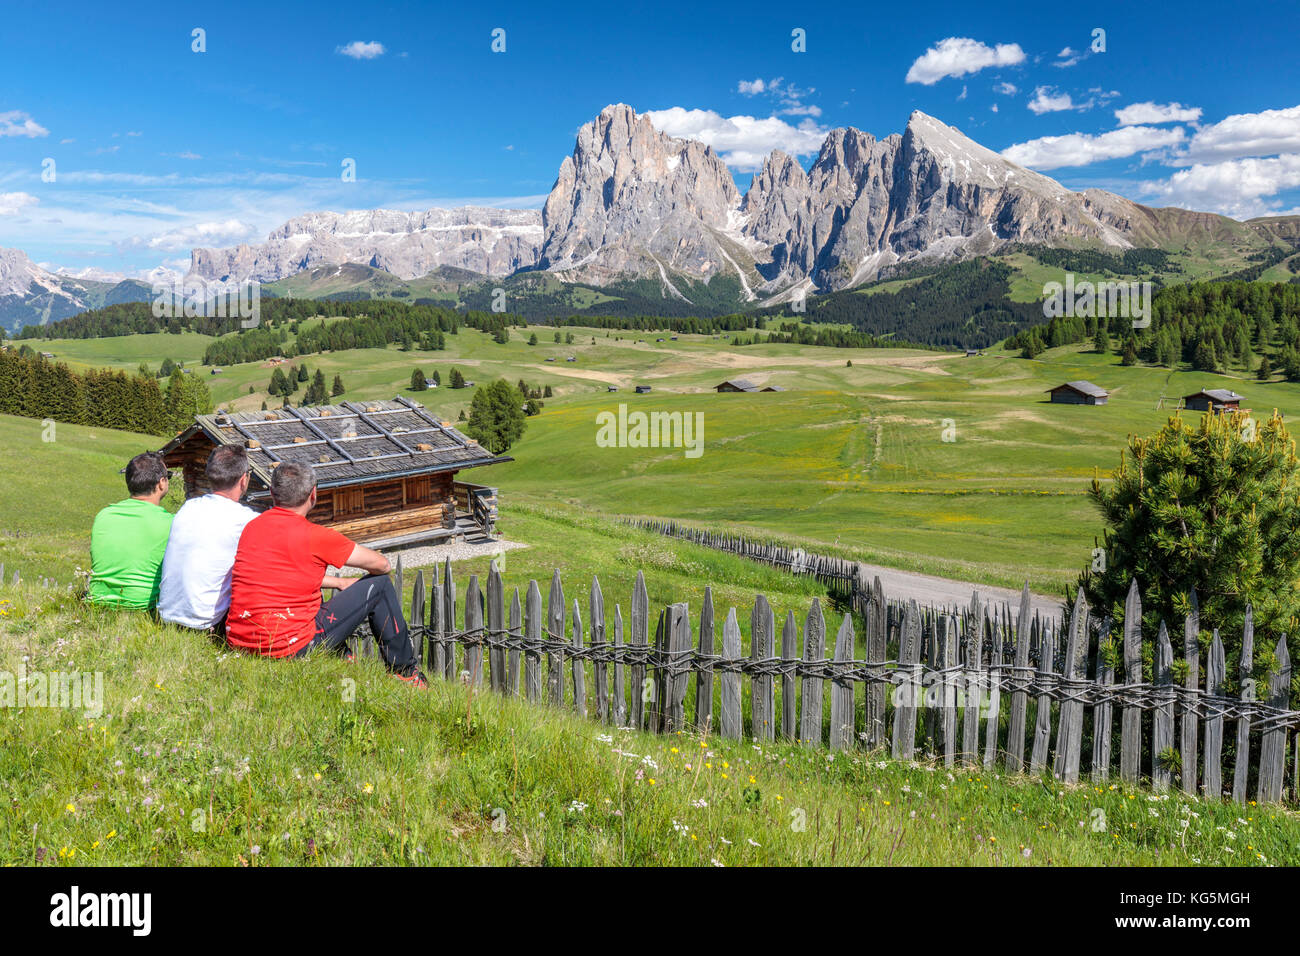 Europe, Italy, South Tyrol, Bolzano, Dolomites, Three hikers seated to admire the landscape on the mountain of siusi, with colorful t-shirts like the colors of the Italian flag Stock Photo